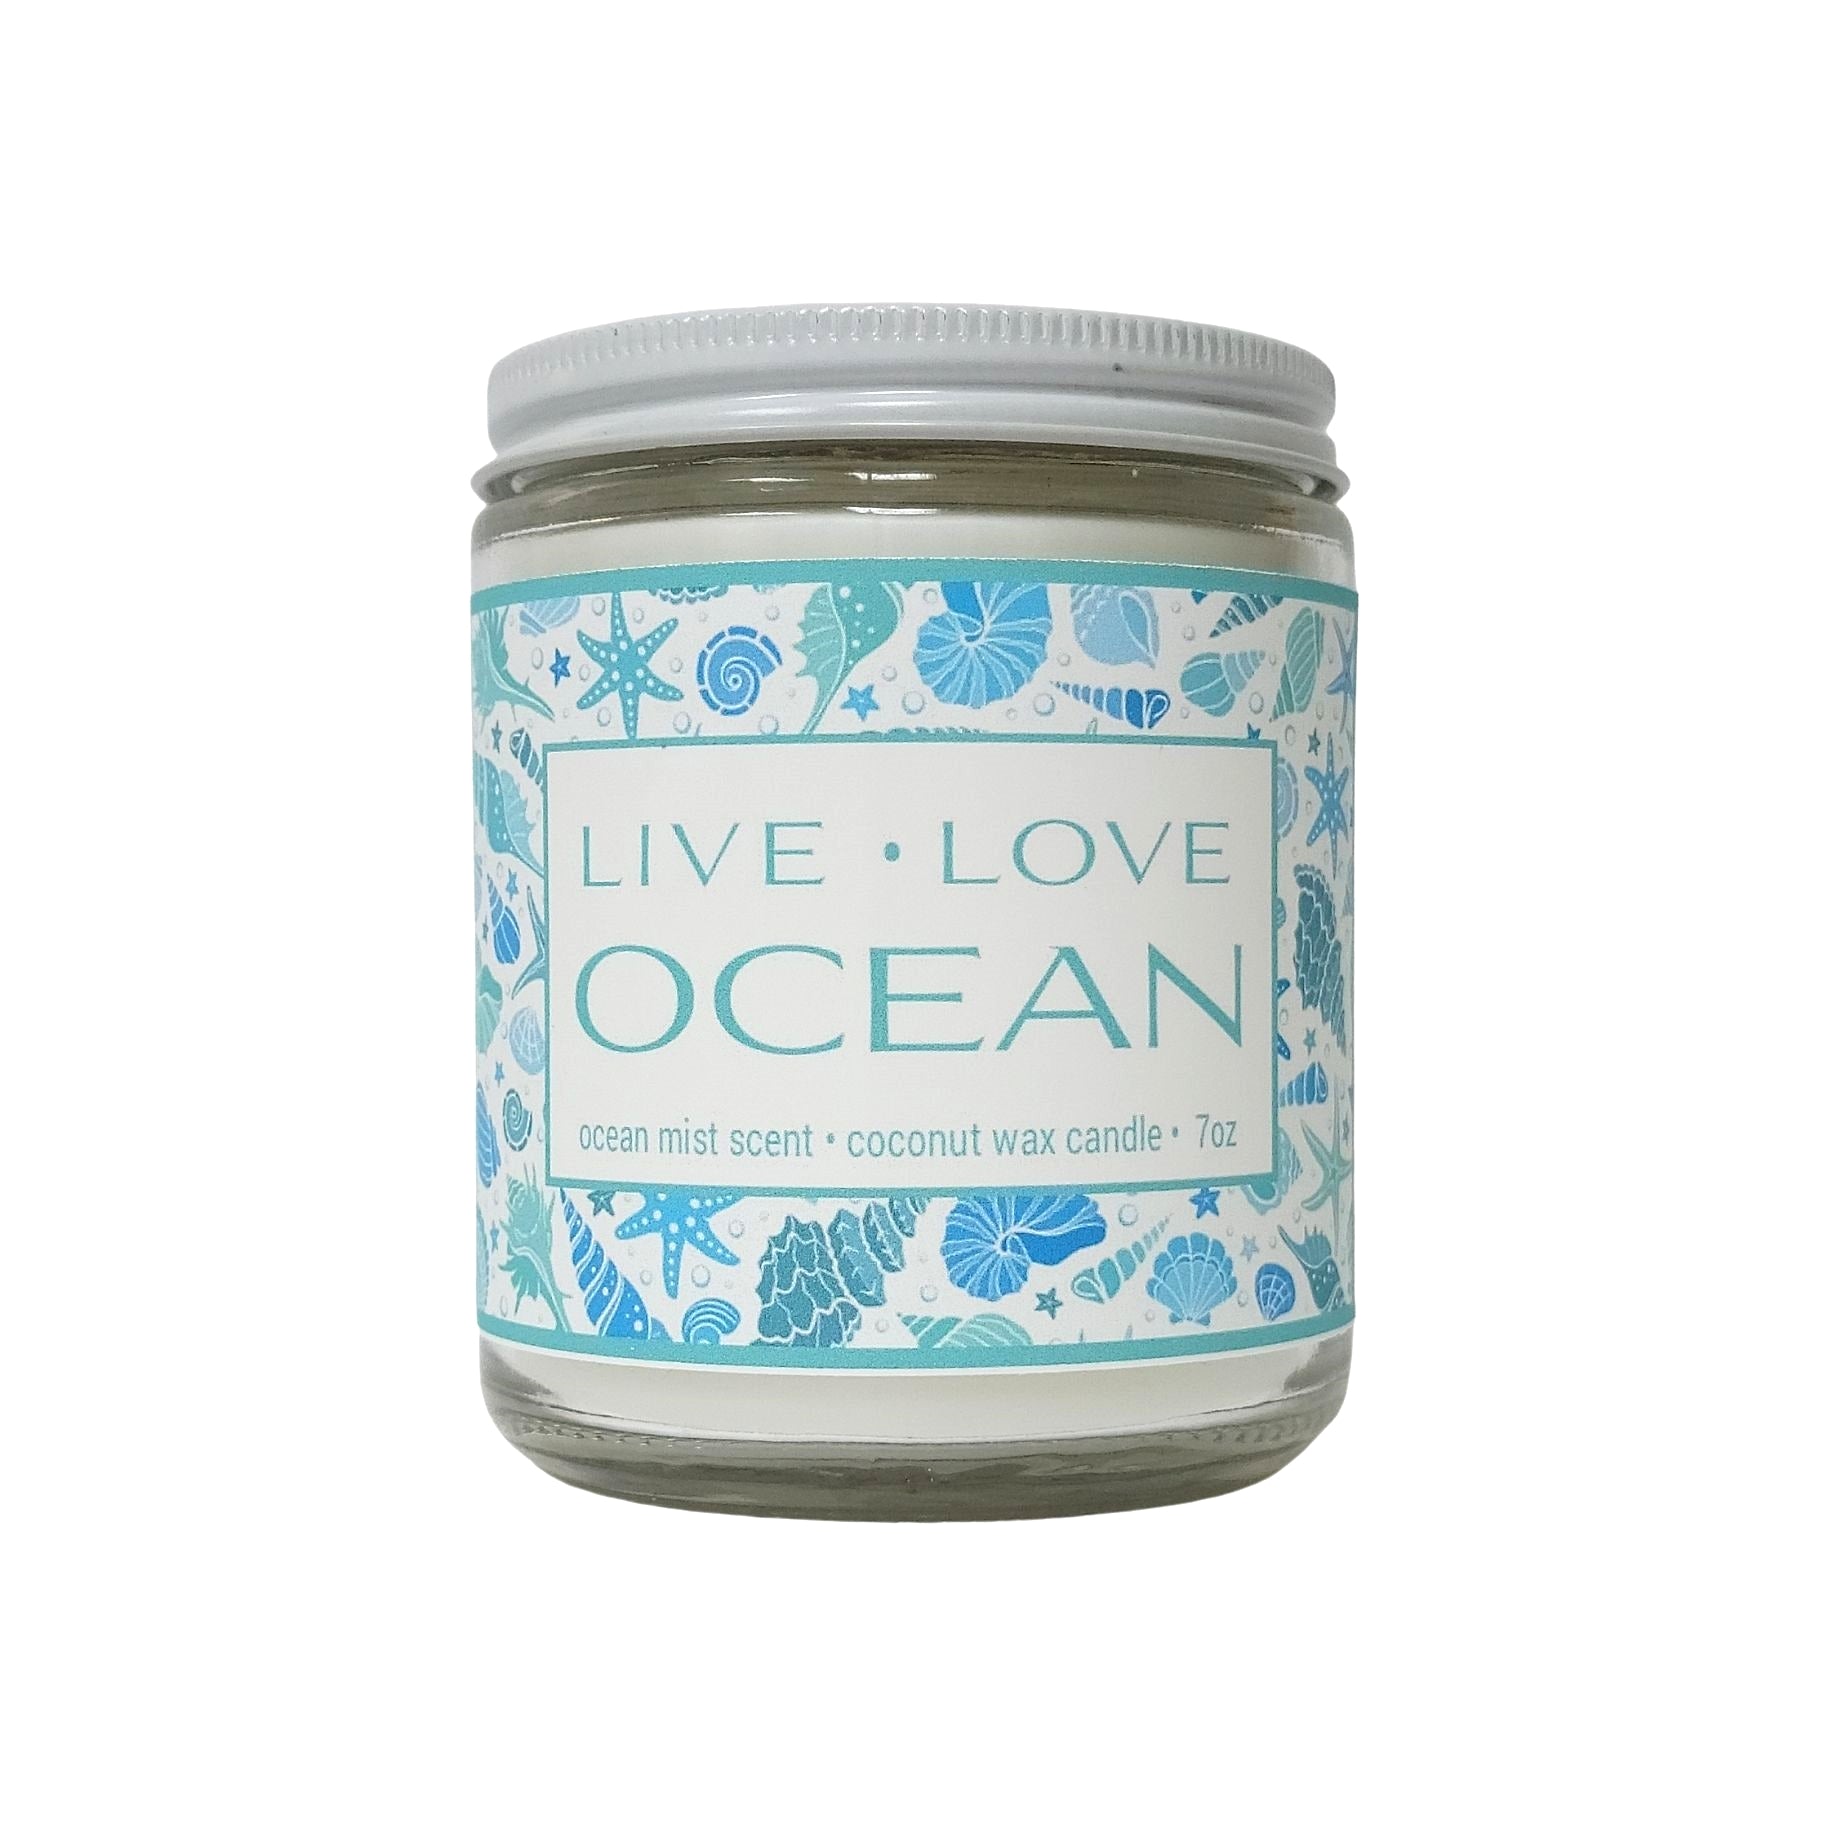 LIVE LOVE OCEAN 7oz candle with ocean mist scent